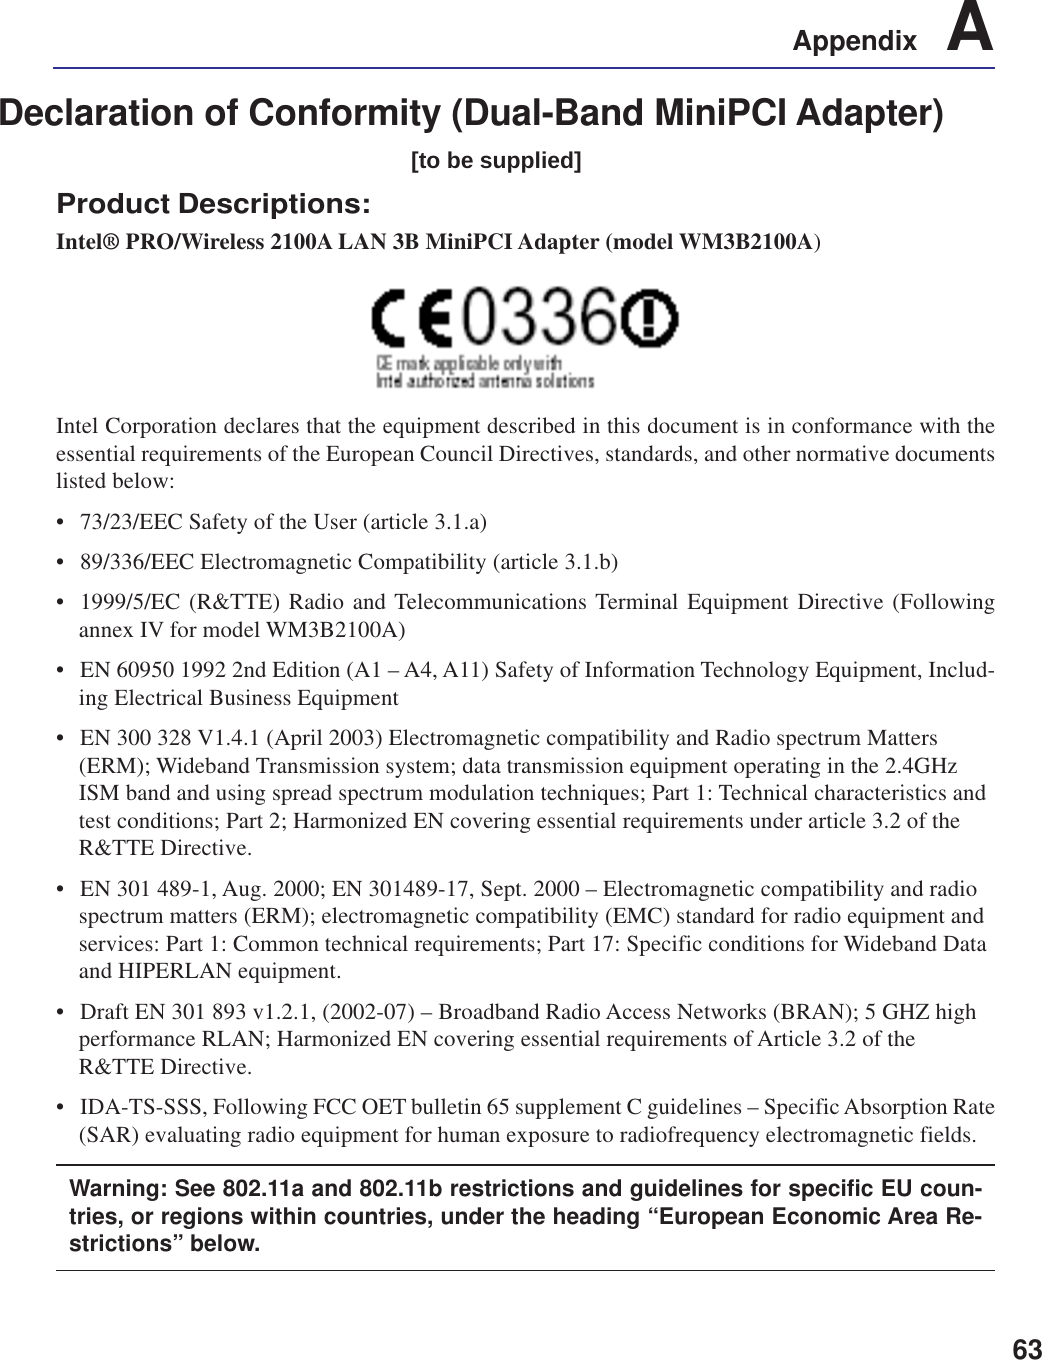 63Appendix    ADeclaration of Conformity (Dual-Band MiniPCI Adapter)[to be supplied]Product Descriptions:Intel® PRO/Wireless 2100A LAN 3B MiniPCI Adapter (model WM3B2100A)Intel Corporation declares that the equipment described in this document is in conformance with theessential requirements of the European Council Directives, standards, and other normative documentslisted below:• 73/23/EEC Safety of the User (article 3.1.a)• 89/336/EEC Electromagnetic Compatibility (article 3.1.b)• 1999/5/EC (R&amp;TTE) Radio and Telecommunications Terminal Equipment Directive (Followingannex IV for model WM3B2100A)• EN 60950 1992 2nd Edition (A1 – A4, A11) Safety of Information Technology Equipment, Includ-ing Electrical Business Equipment• EN 300 328 V1.4.1 (April 2003) Electromagnetic compatibility and Radio spectrum Matters(ERM); Wideband Transmission system; data transmission equipment operating in the 2.4GHzISM band and using spread spectrum modulation techniques; Part 1: Technical characteristics andtest conditions; Part 2; Harmonized EN covering essential requirements under article 3.2 of theR&amp;TTE Directive.• EN 301 489-1, Aug. 2000; EN 301489-17, Sept. 2000 – Electromagnetic compatibility and radiospectrum matters (ERM); electromagnetic compatibility (EMC) standard for radio equipment andservices: Part 1: Common technical requirements; Part 17: Specific conditions for Wideband Dataand HIPERLAN equipment.• Draft EN 301 893 v1.2.1, (2002-07) – Broadband Radio Access Networks (BRAN); 5 GHZ highperformance RLAN; Harmonized EN covering essential requirements of Article 3.2 of theR&amp;TTE Directive.• IDA-TS-SSS, Following FCC OET bulletin 65 supplement C guidelines – Specific Absorption Rate(SAR) evaluating radio equipment for human exposure to radiofrequency electromagnetic fields.Warning: See 802.11a and 802.11b restrictions and guidelines for specific EU coun-tries, or regions within countries, under the heading “European Economic Area Re-strictions” below.